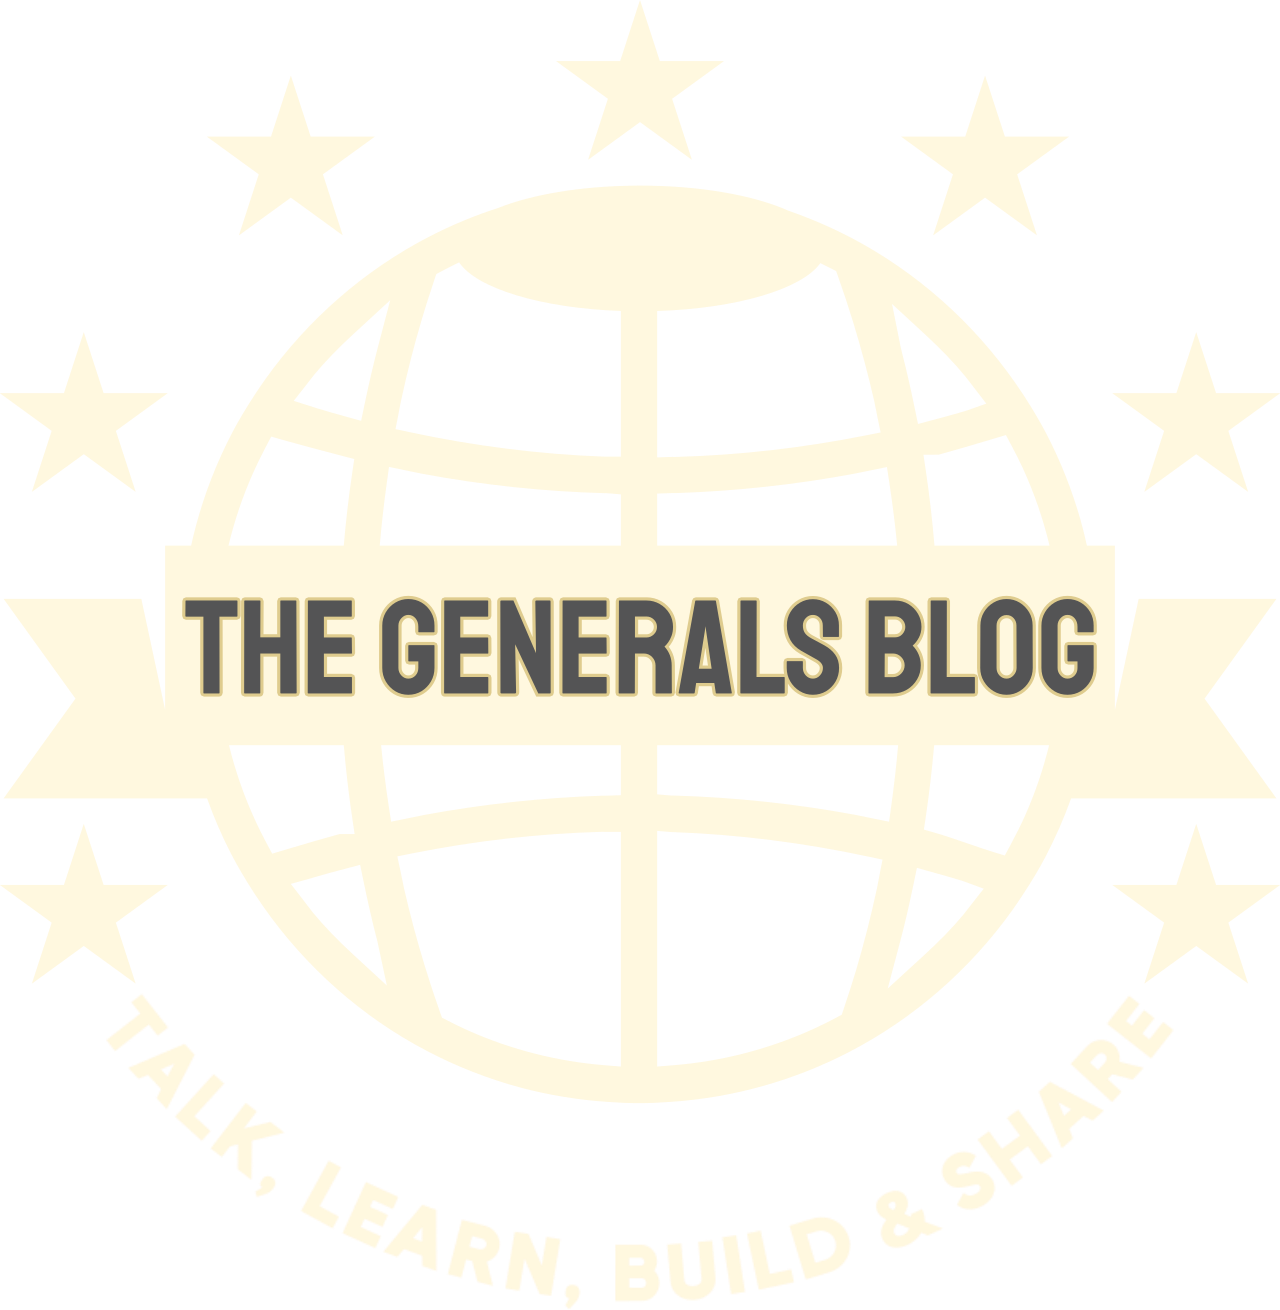 The Generals Blog's web page